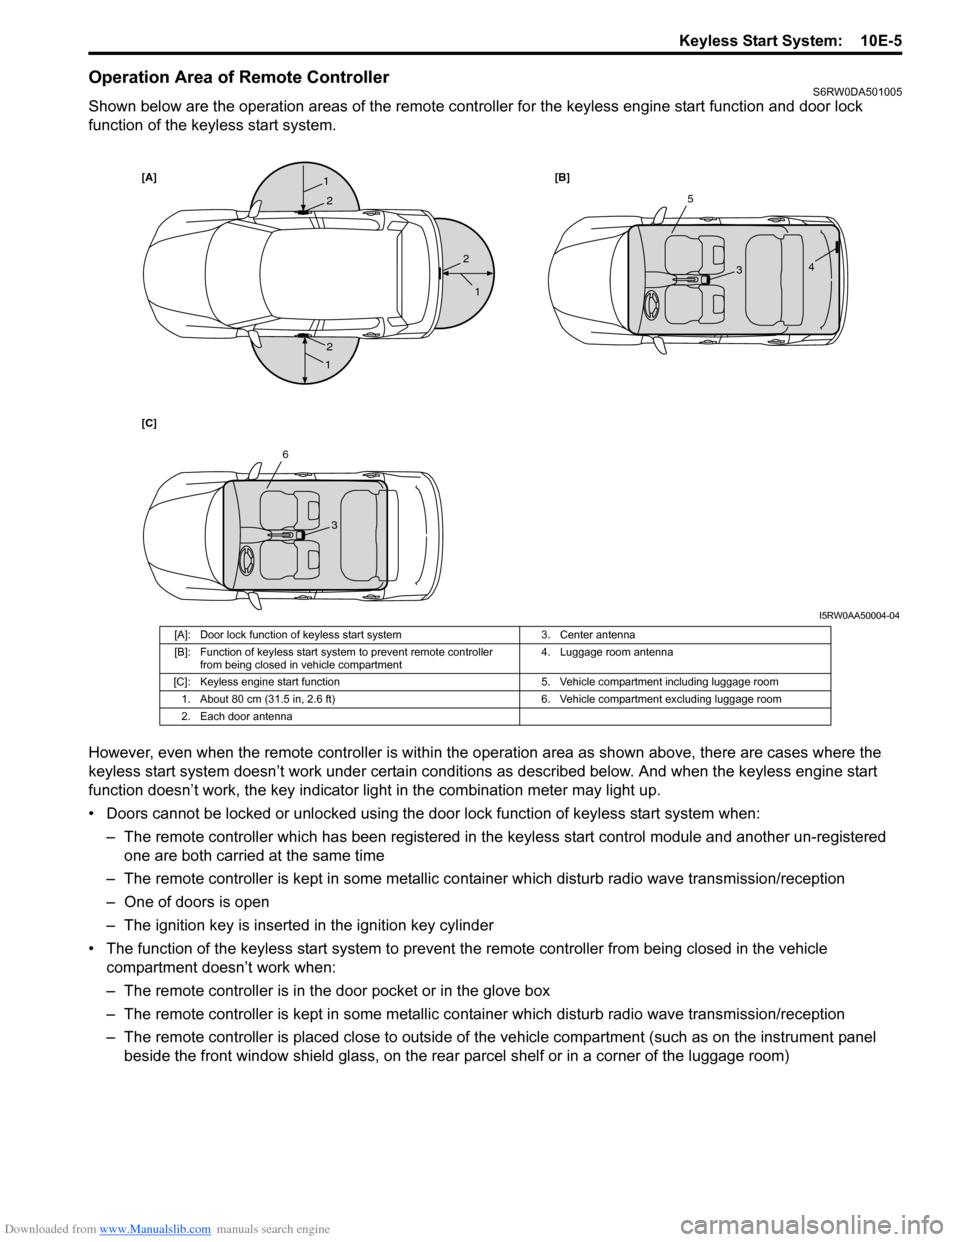 SUZUKI SX4 2006 1.G Service User Guide Downloaded from www.Manualslib.com manuals search engine Keyless Start System:  10E-5
Operation Area of Remote ControllerS6RW0DA501005
Shown below are the operation areas of the remote controller for 